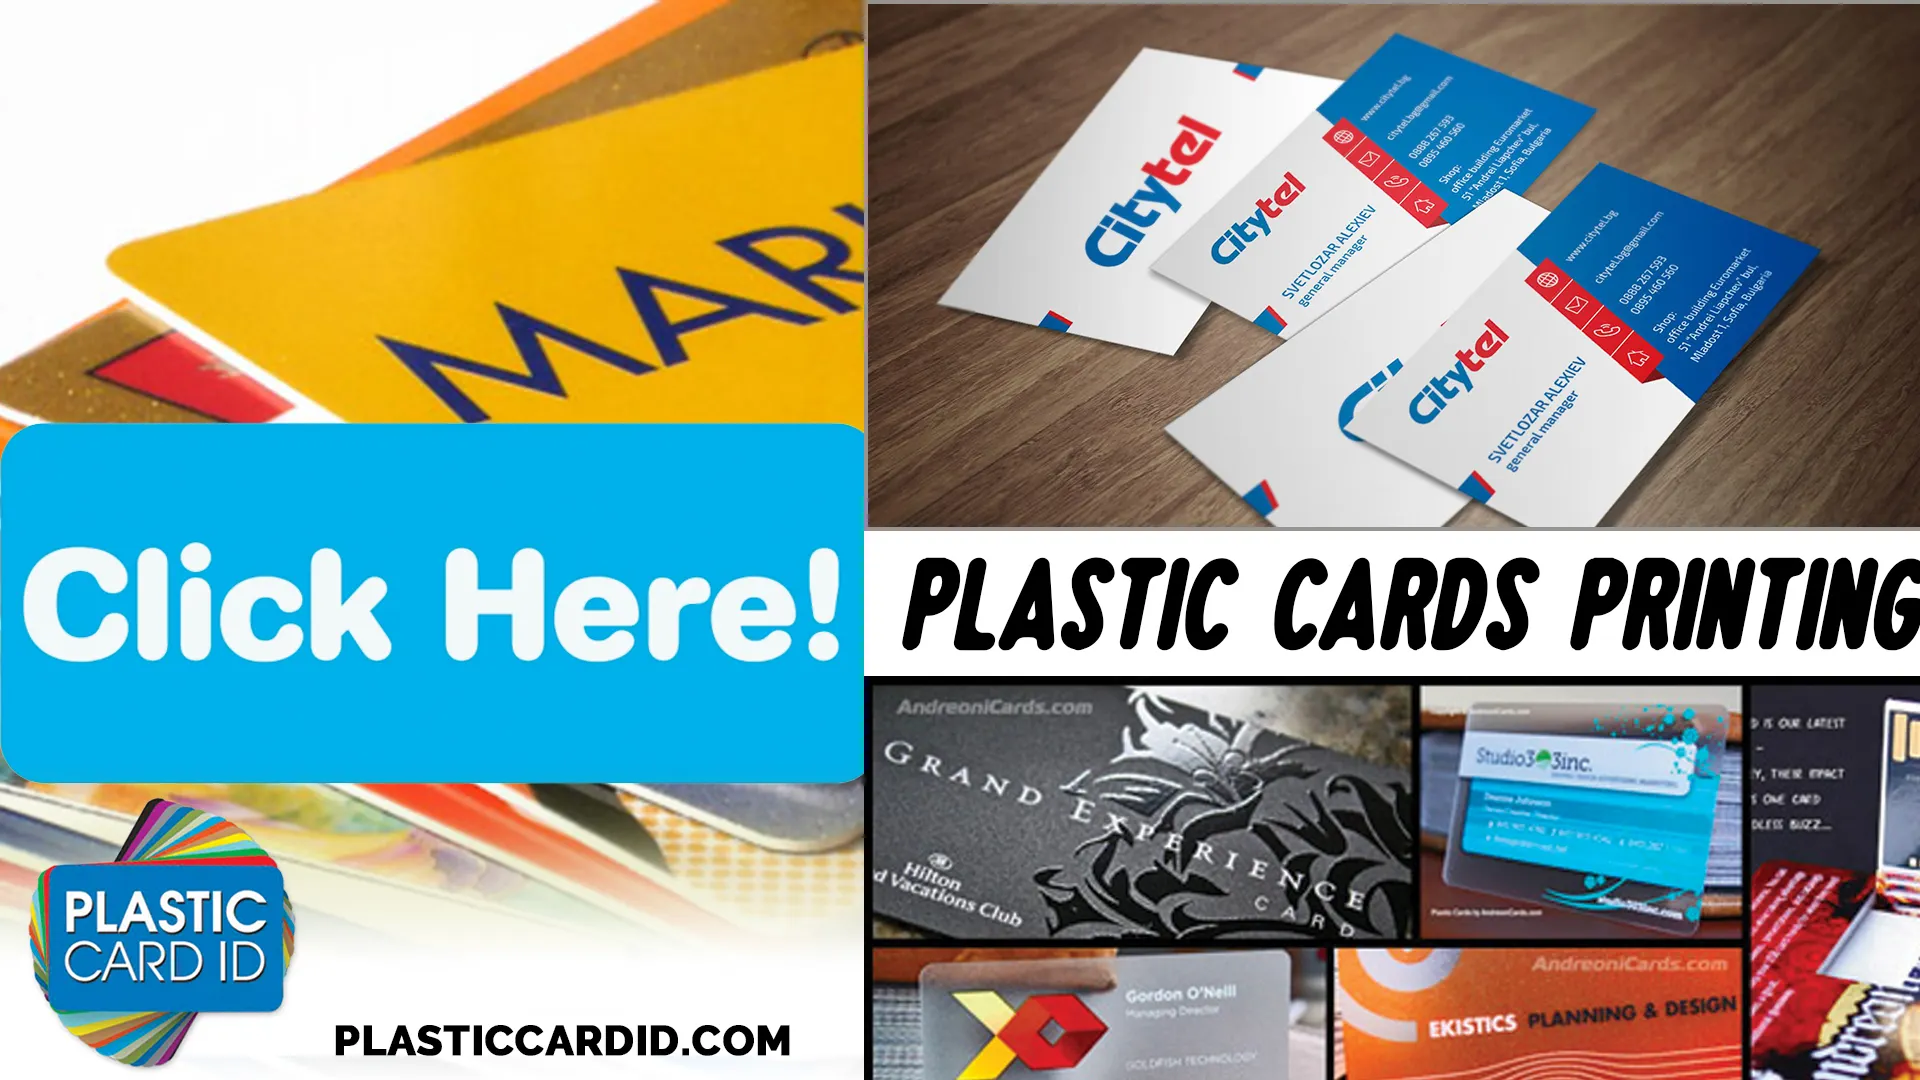 Welcome to the World of Enhanced Customer Retention with Plastic Card ID




